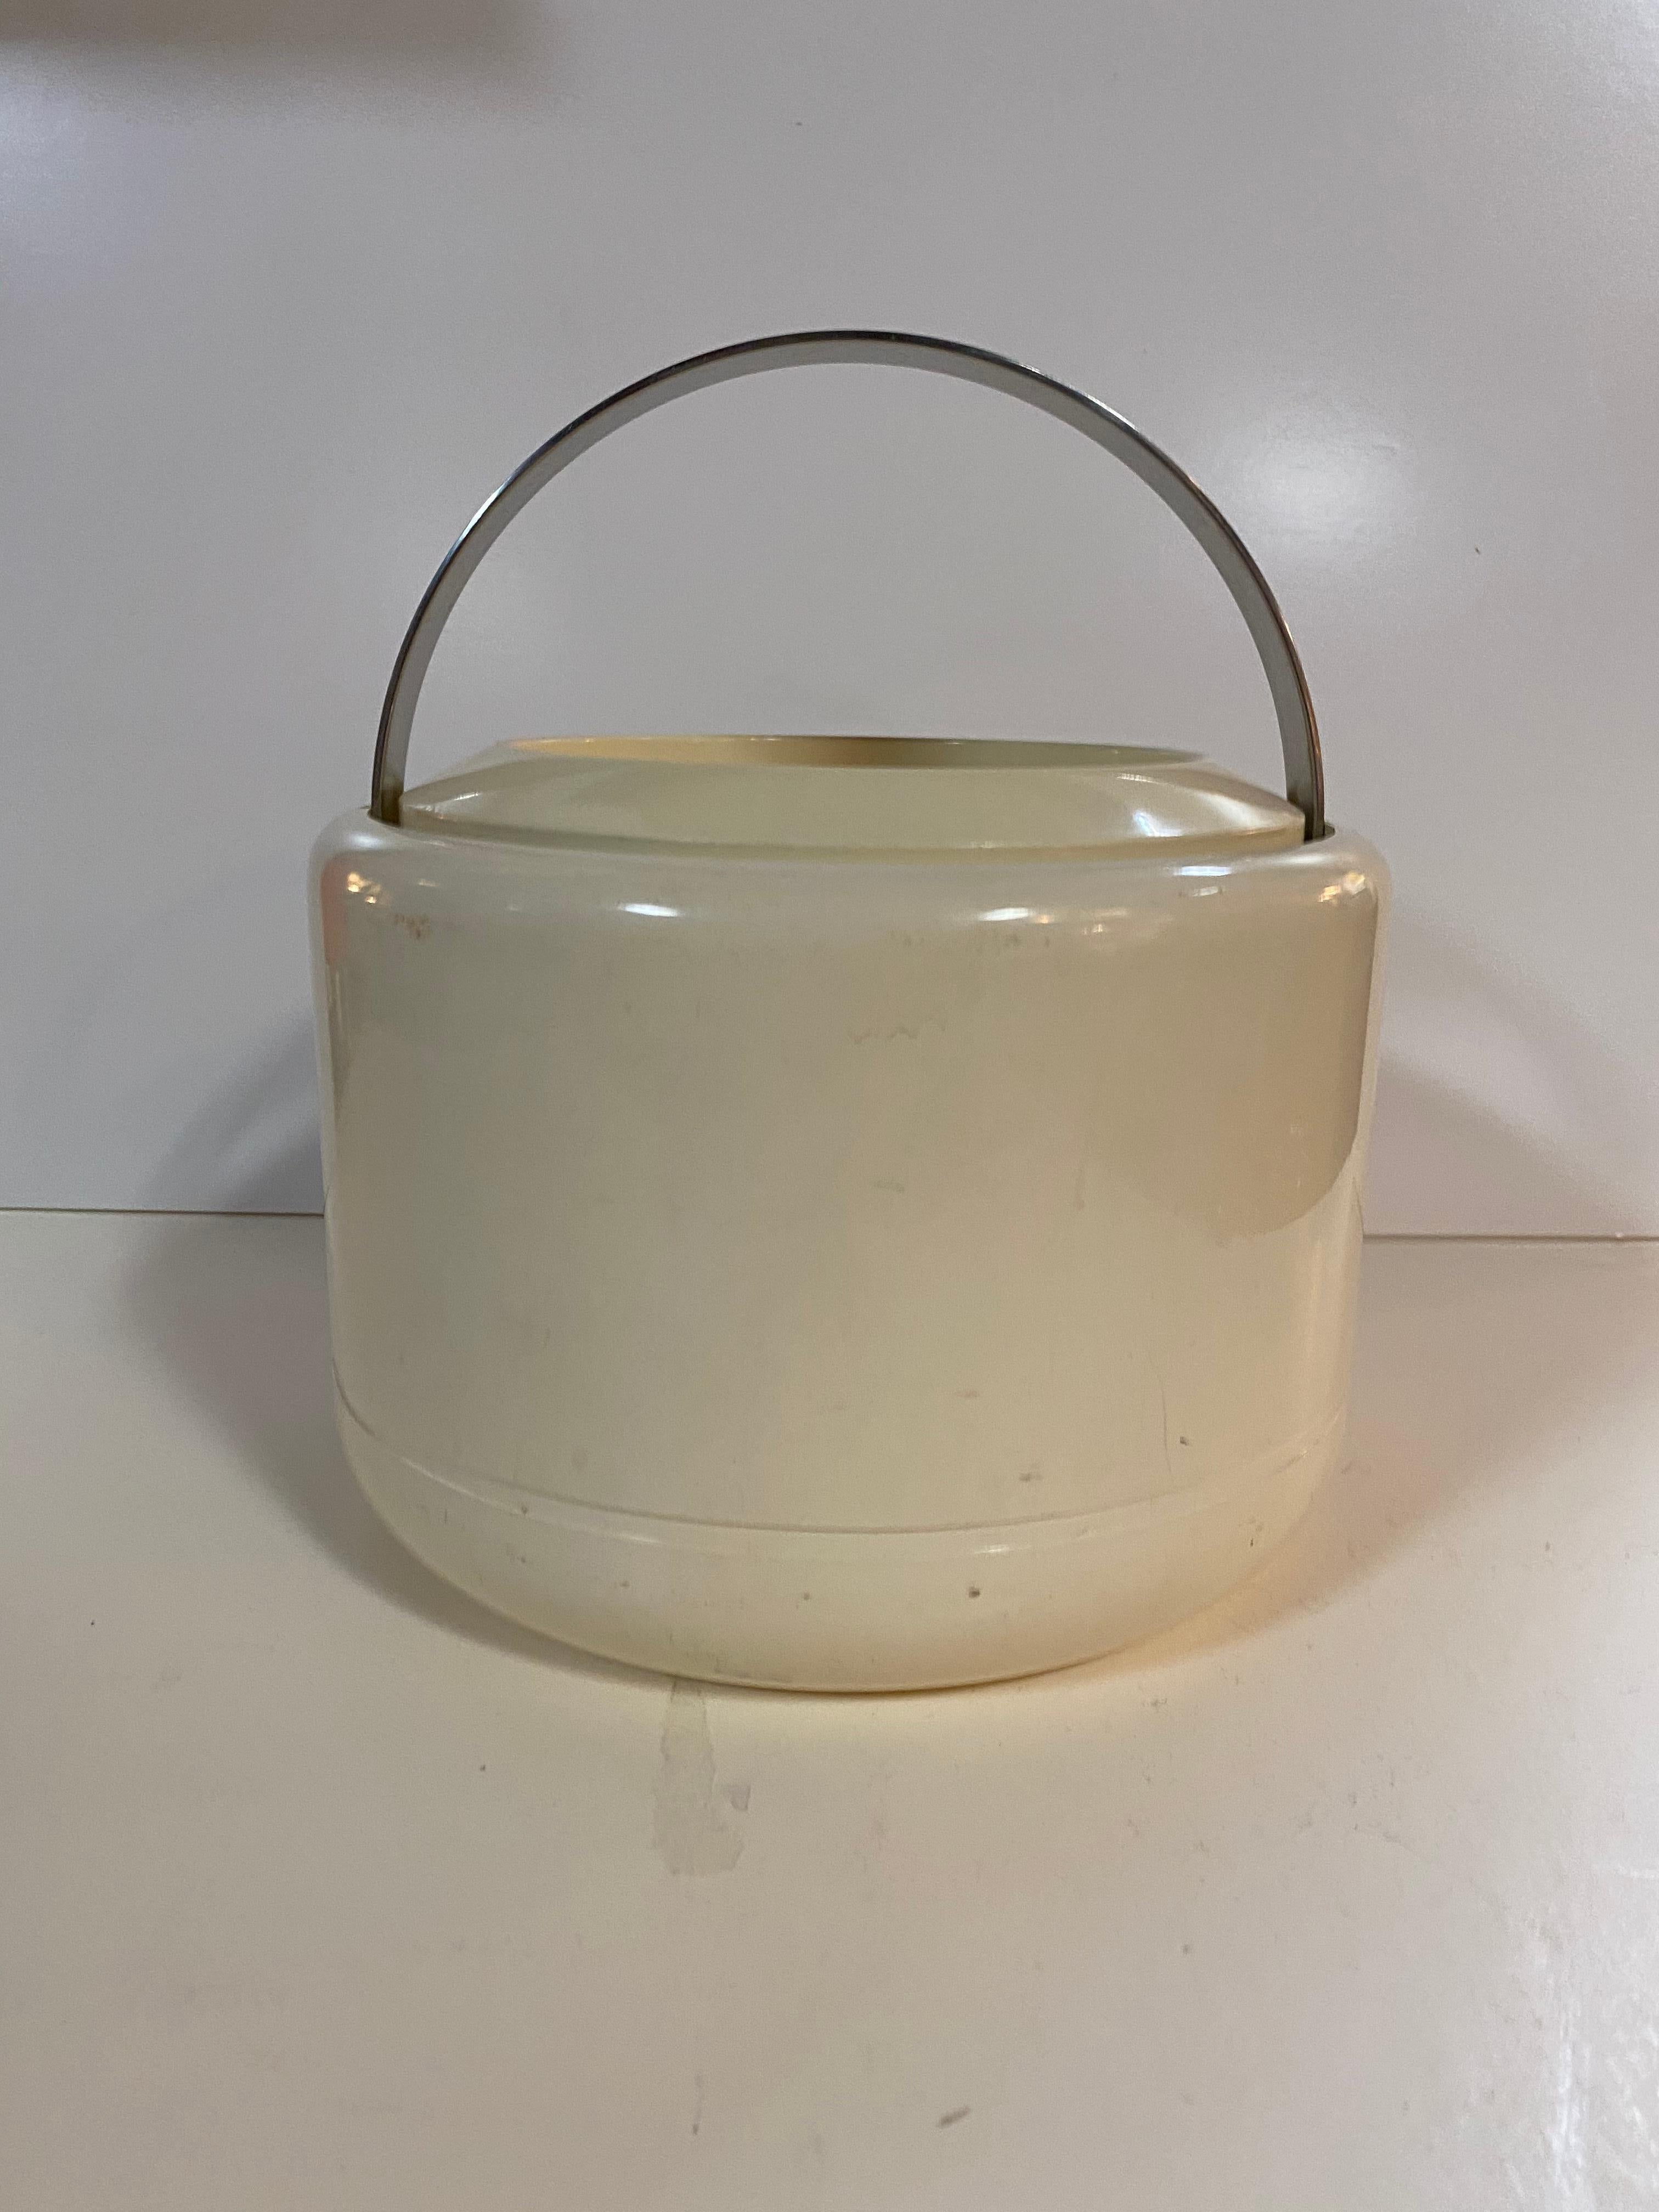 A cream / off-white ice bucket by Erik Magnussen for Stelton. Made of plastic and features a brushed metal handle that folds down when not in use and a removable top with self-handle. Danish, circa 1960.

Marked on underside; Stelton Design, Erik